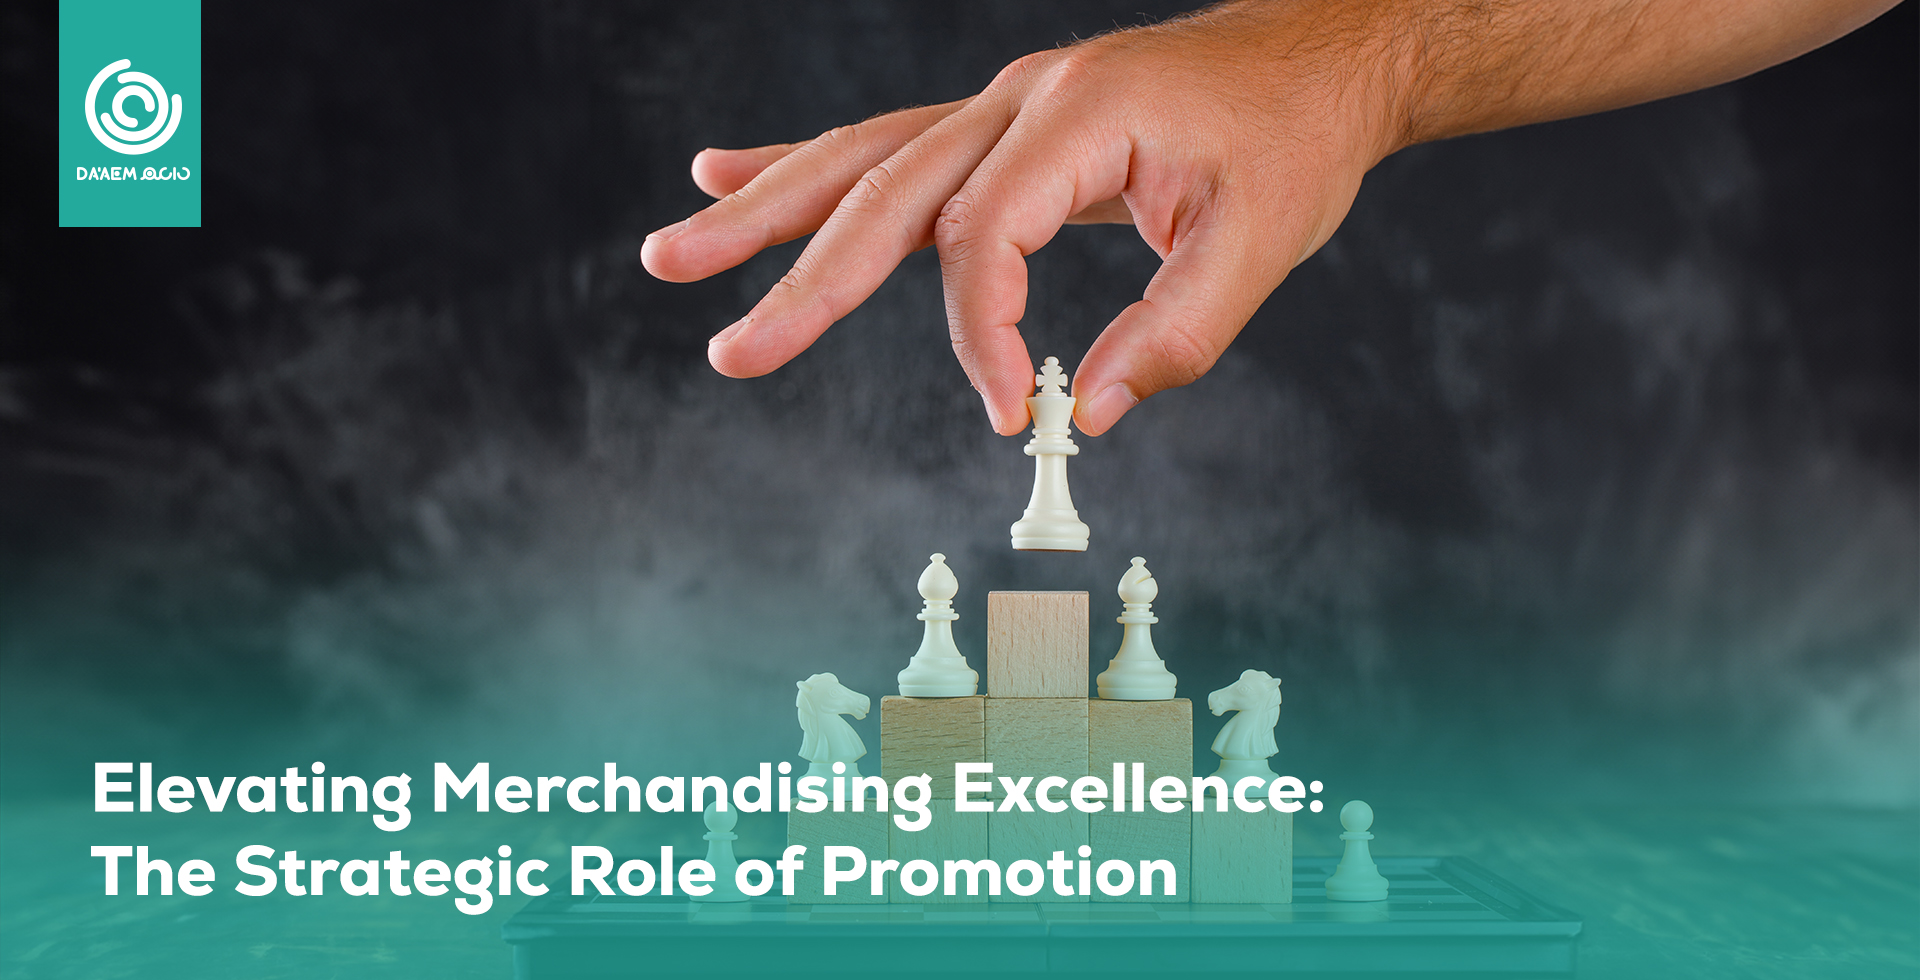 Elevating Merchandising Excellence: The Strategic Great Role of Promotions.